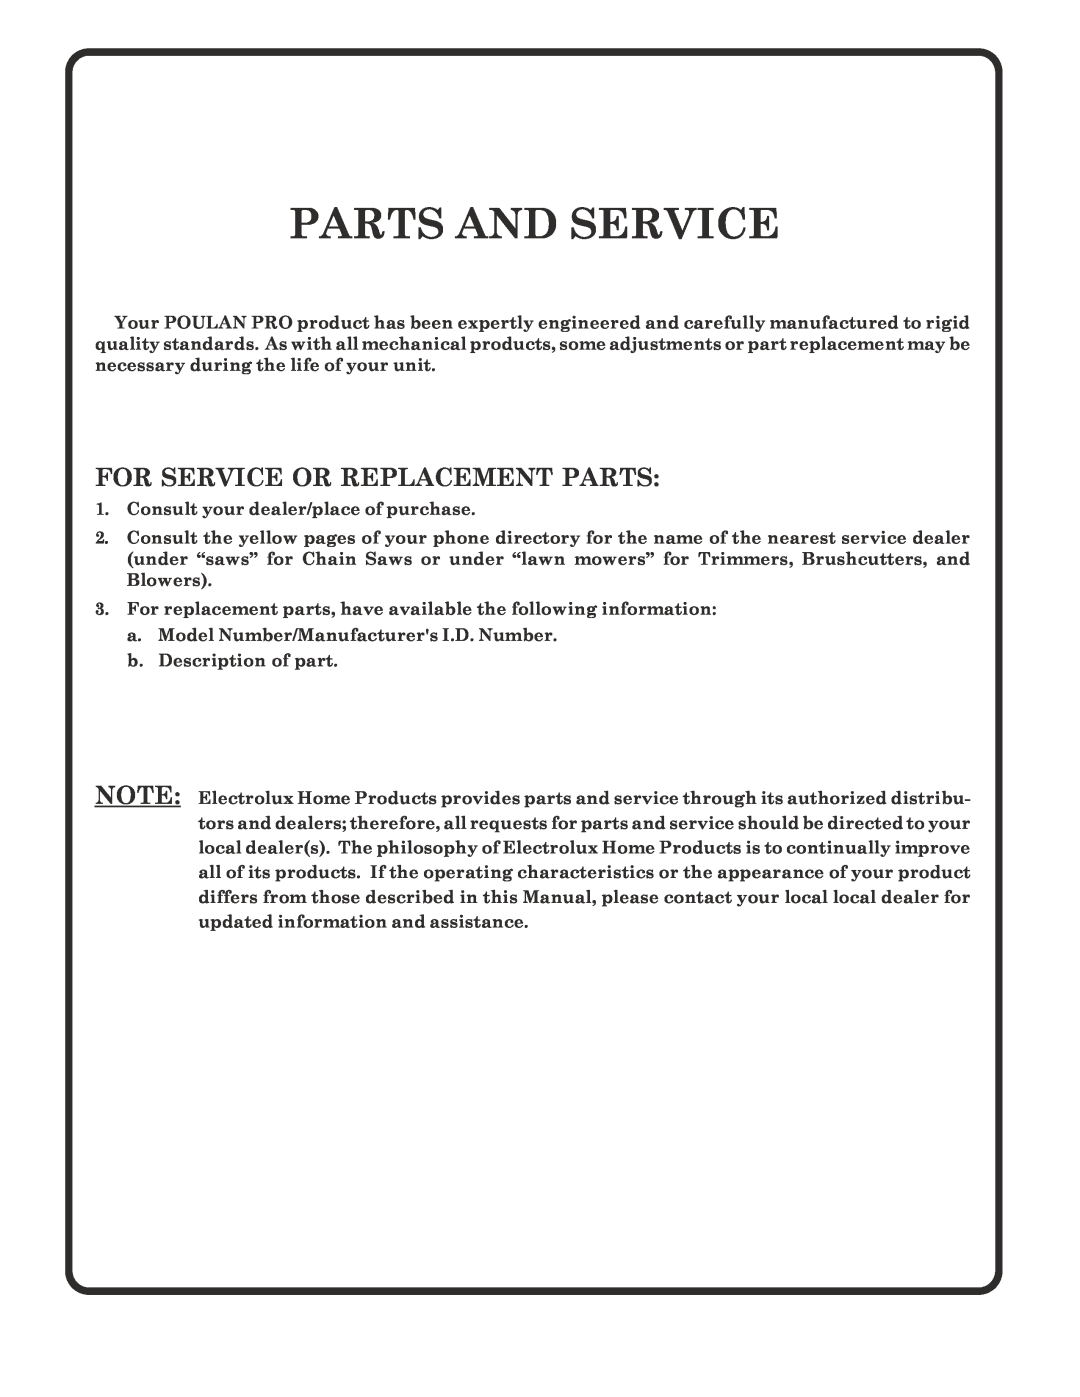 Poulan PPR2042STB owner manual Parts And Service, For Service Or Replacement Parts 